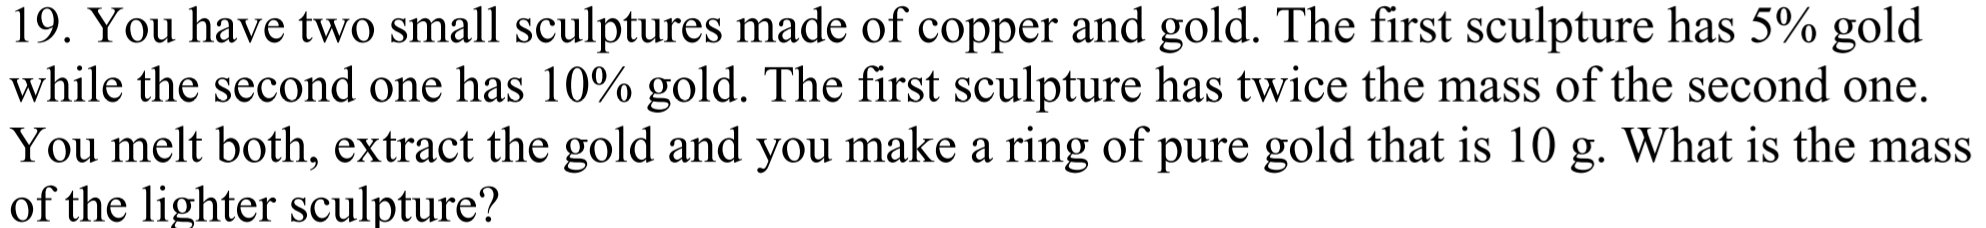 19. You have two small sculptures made of copper and gold. The first sculpture has 5% gold
while the second one has 10% gold. The first sculpture has twice the mass of the second one.
You melt both, extract the gold and you make a ring of pure gold that is 10 g. What is the mass
of the lighter sculpture?
